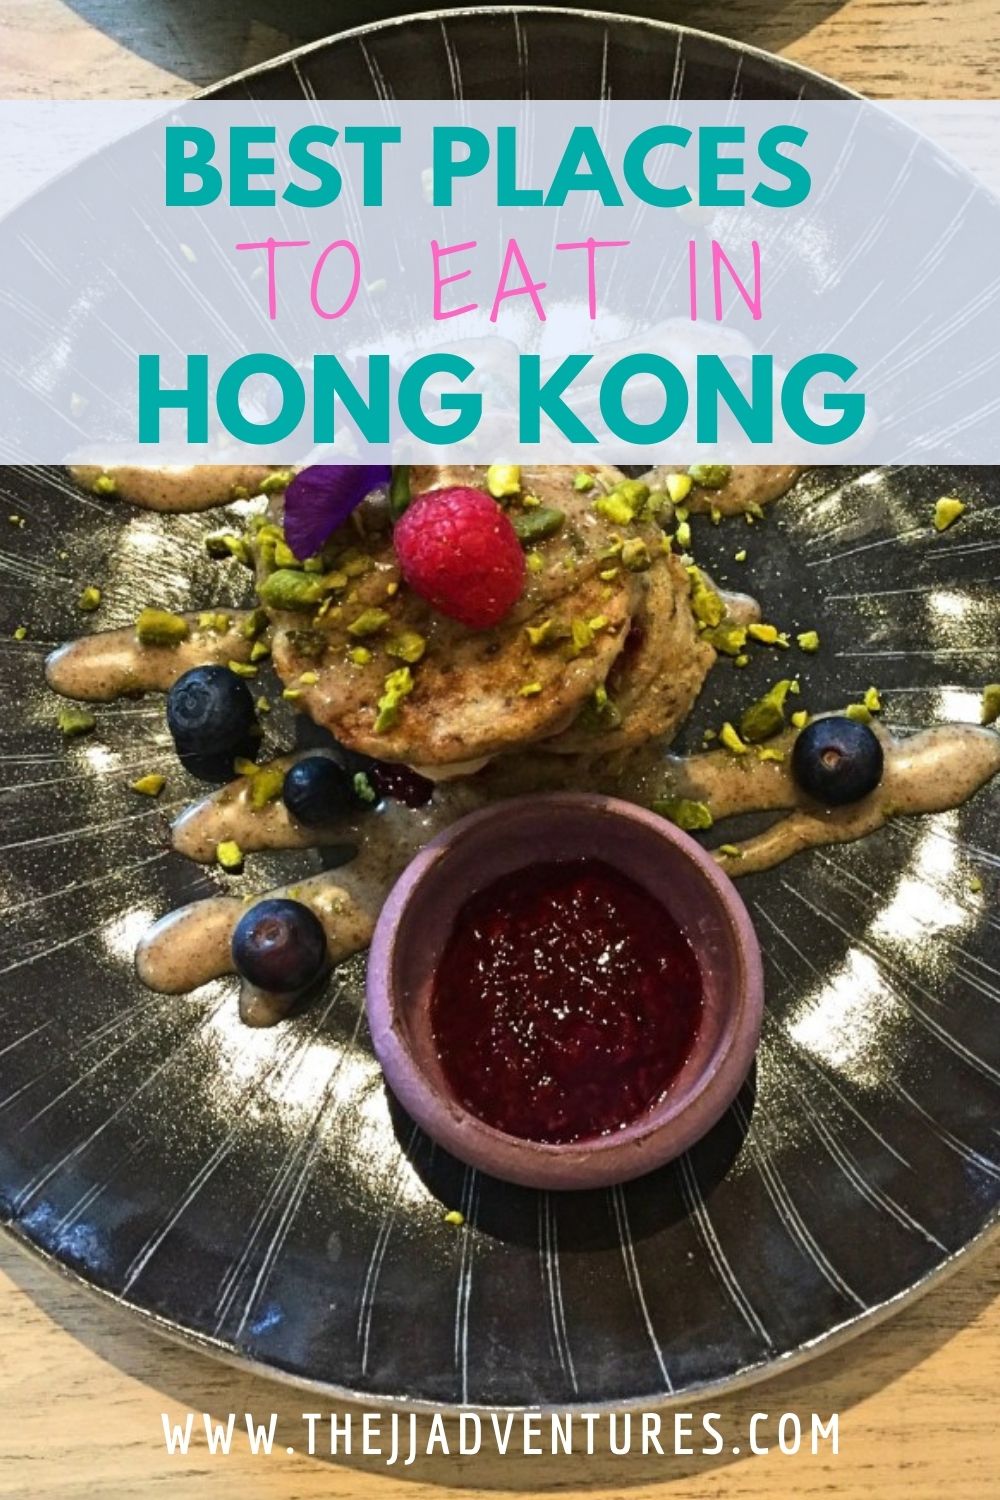 Best Places to Eat in Hong Kong • TheJJAdventures